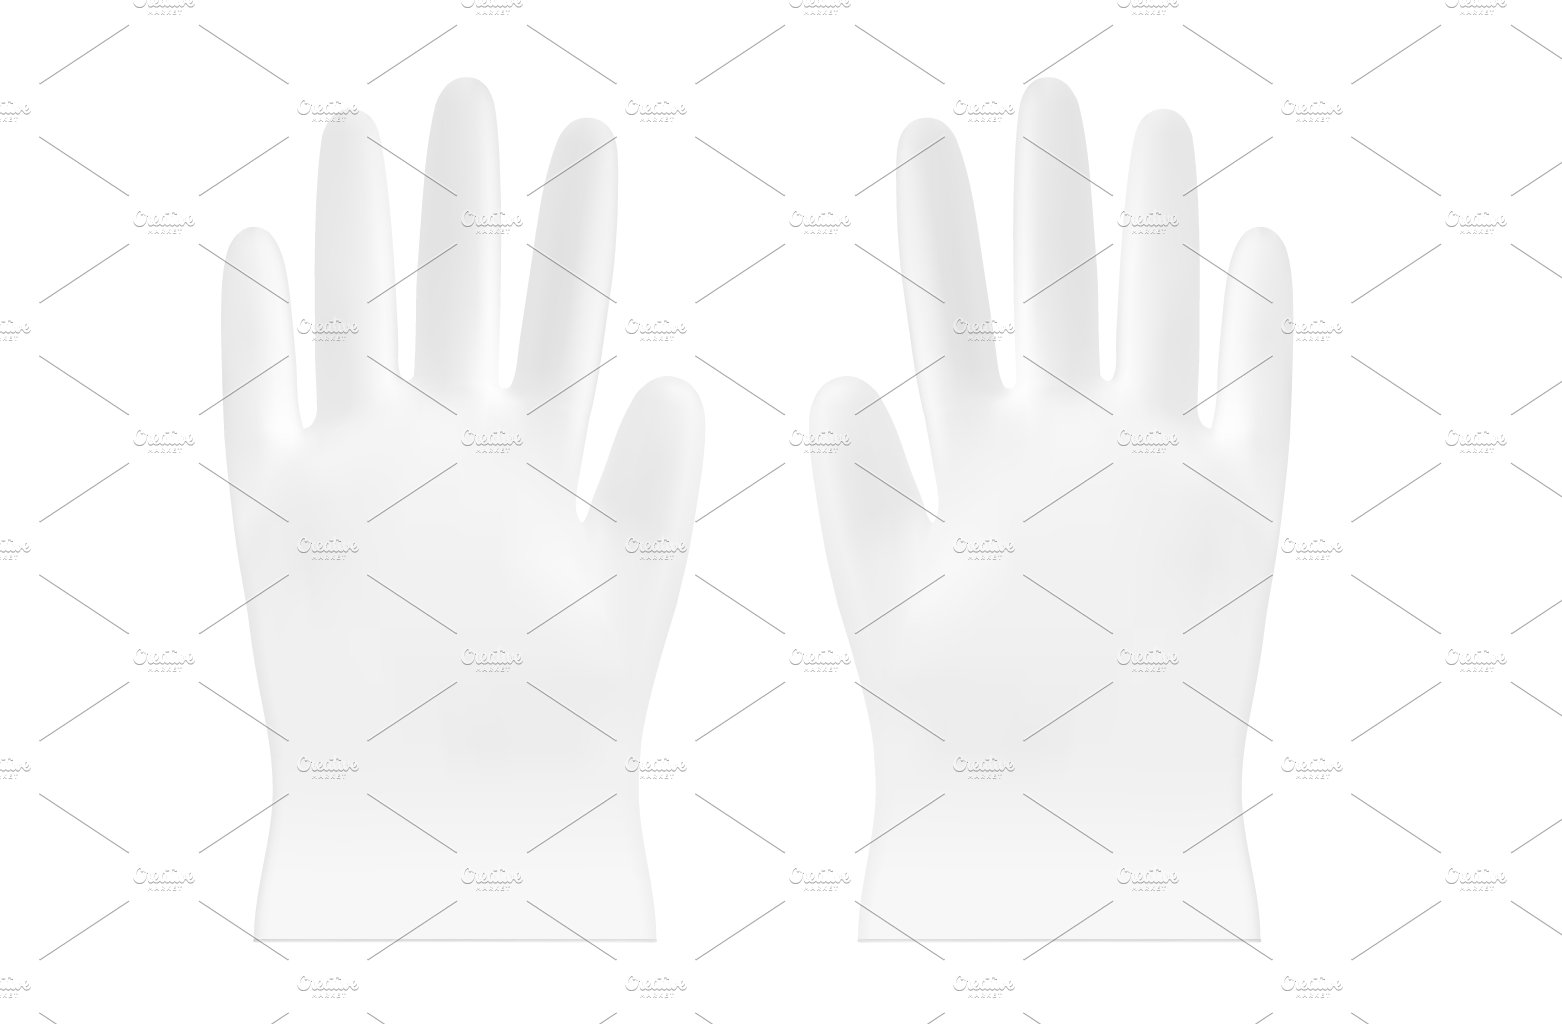 White disposable nitrile gloves cover image.